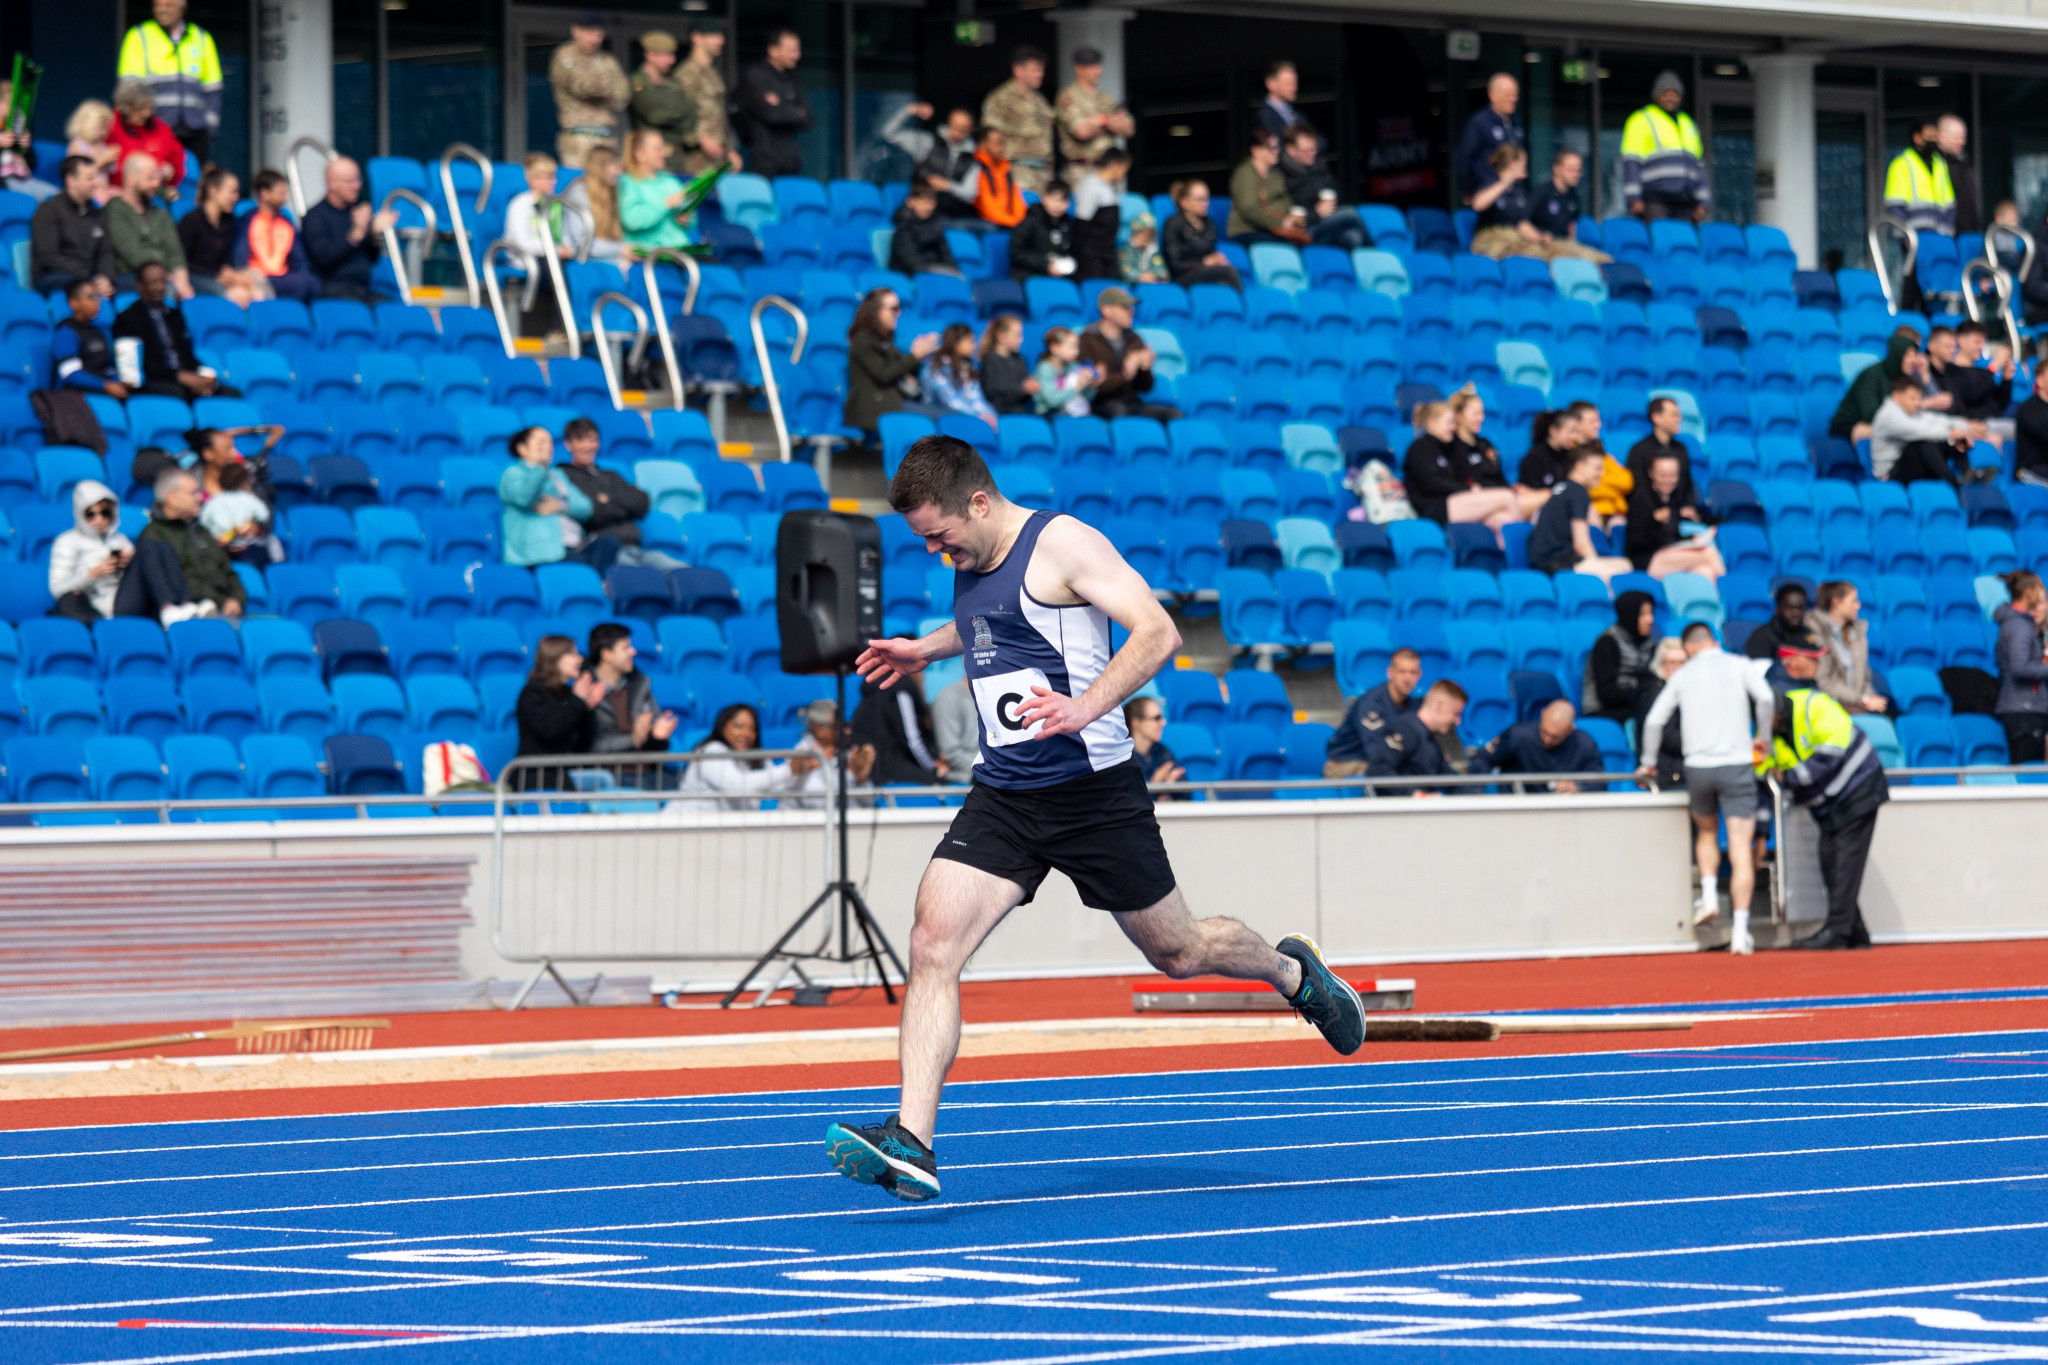 
Military personnel from regular and reserve units across Wales, West Midlands and East Midlands took part in the track and field events ©Birmingham City Council